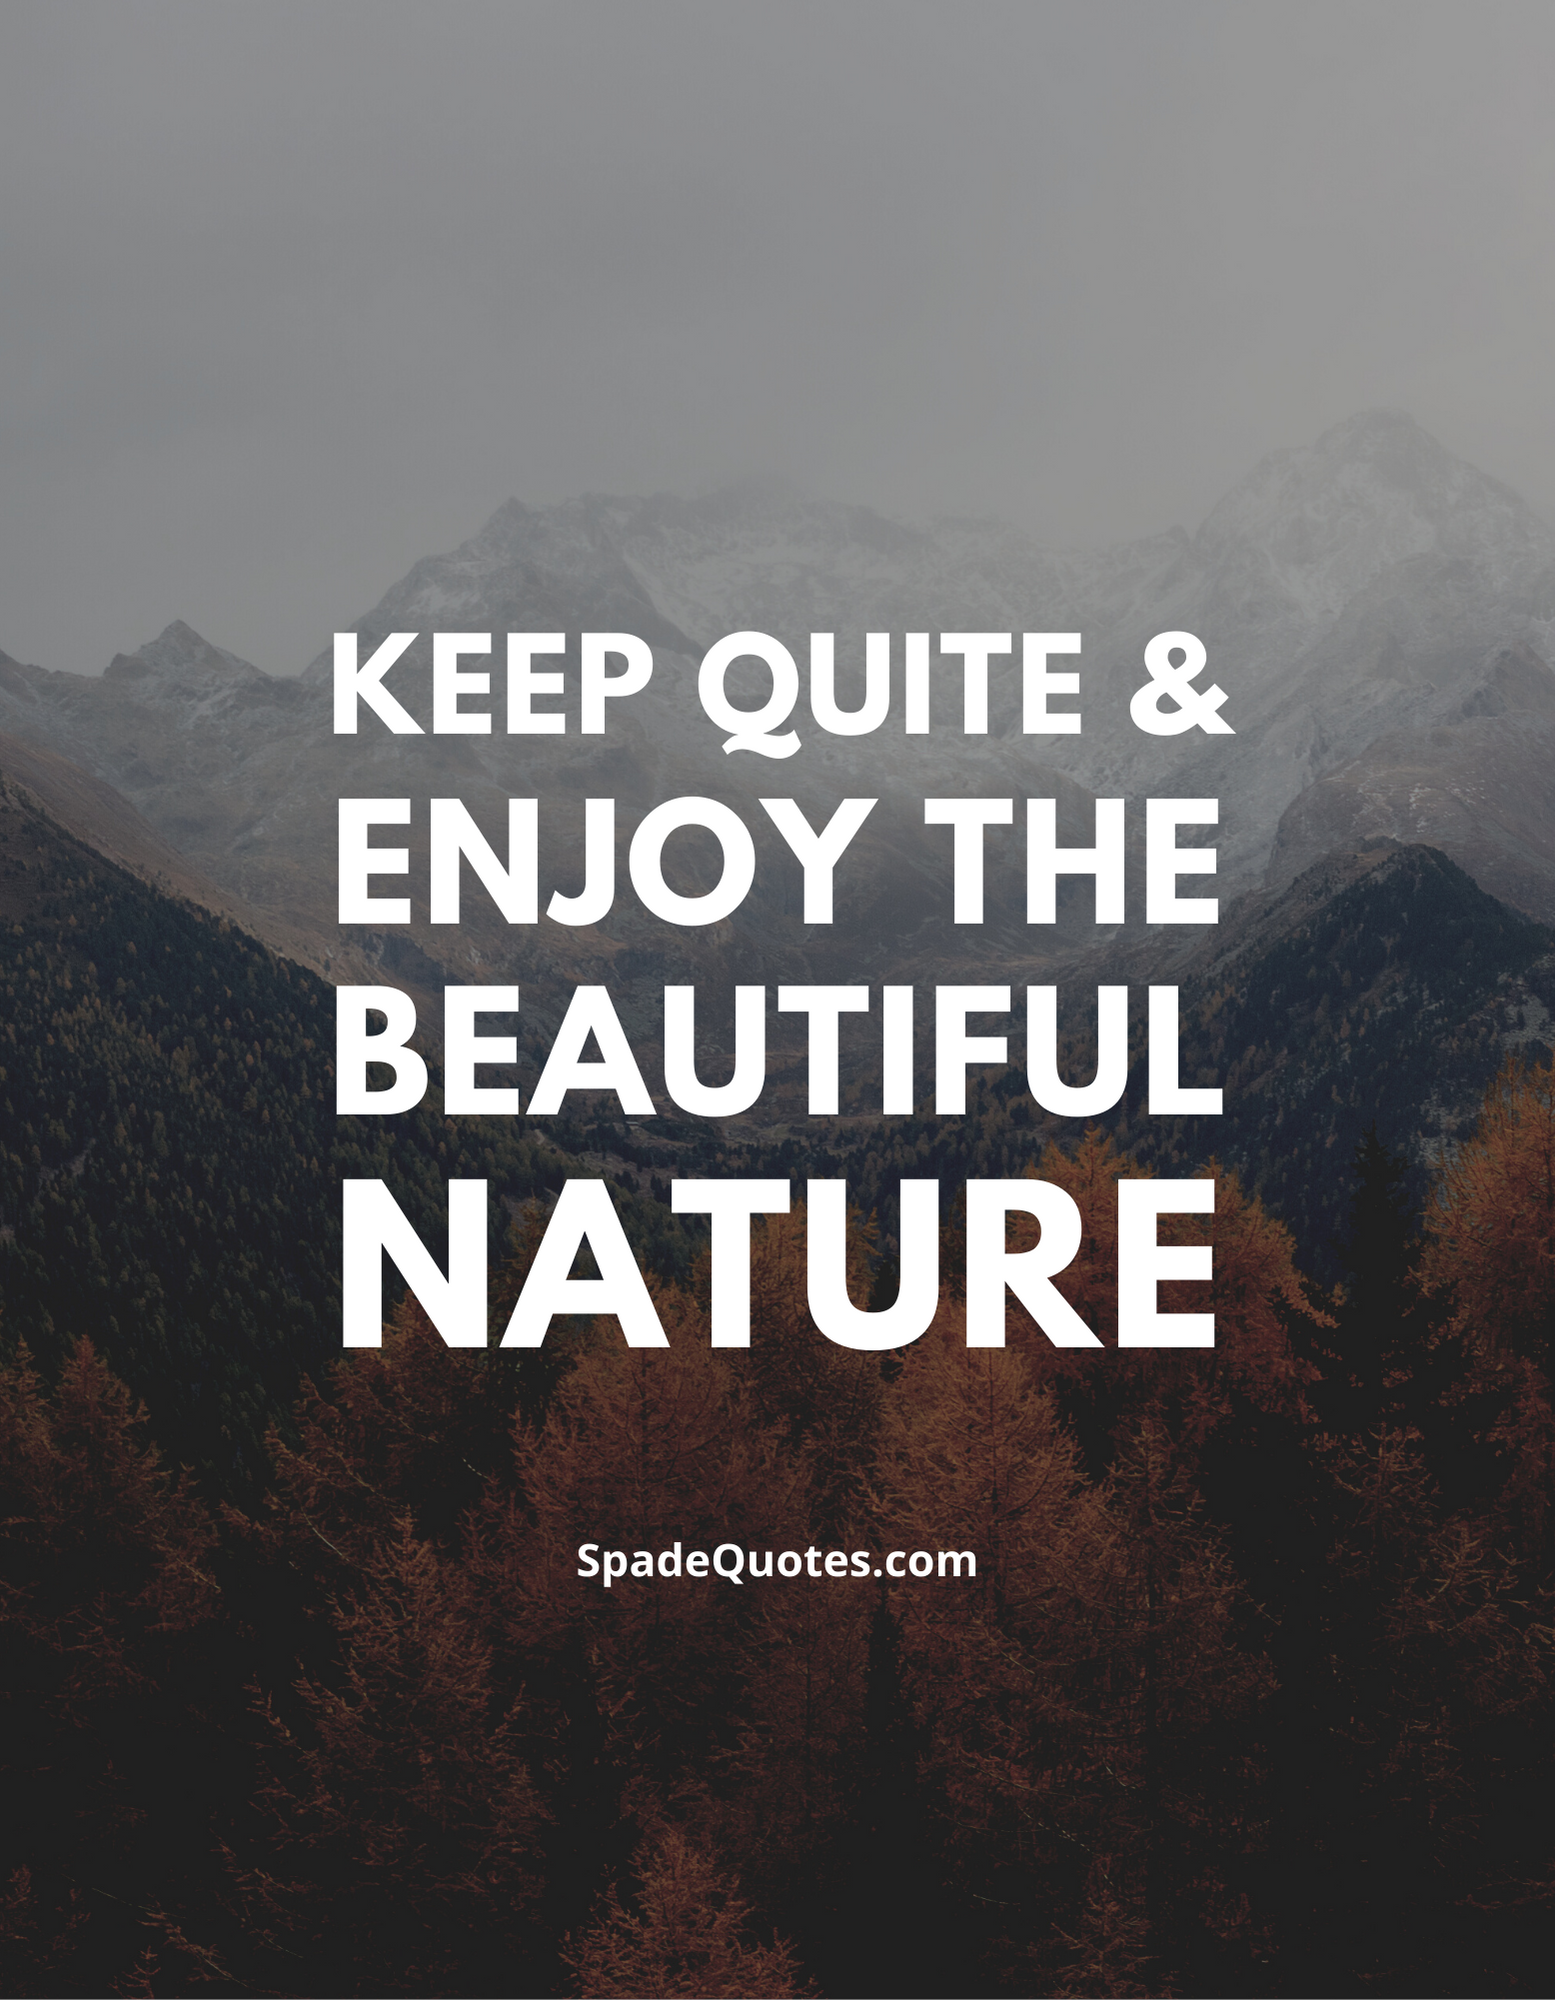 Keep-quiet-and-enjoy-the-beautiful-nature-Funny-Nature-Captions-for-Instagram-SpadeQuotes